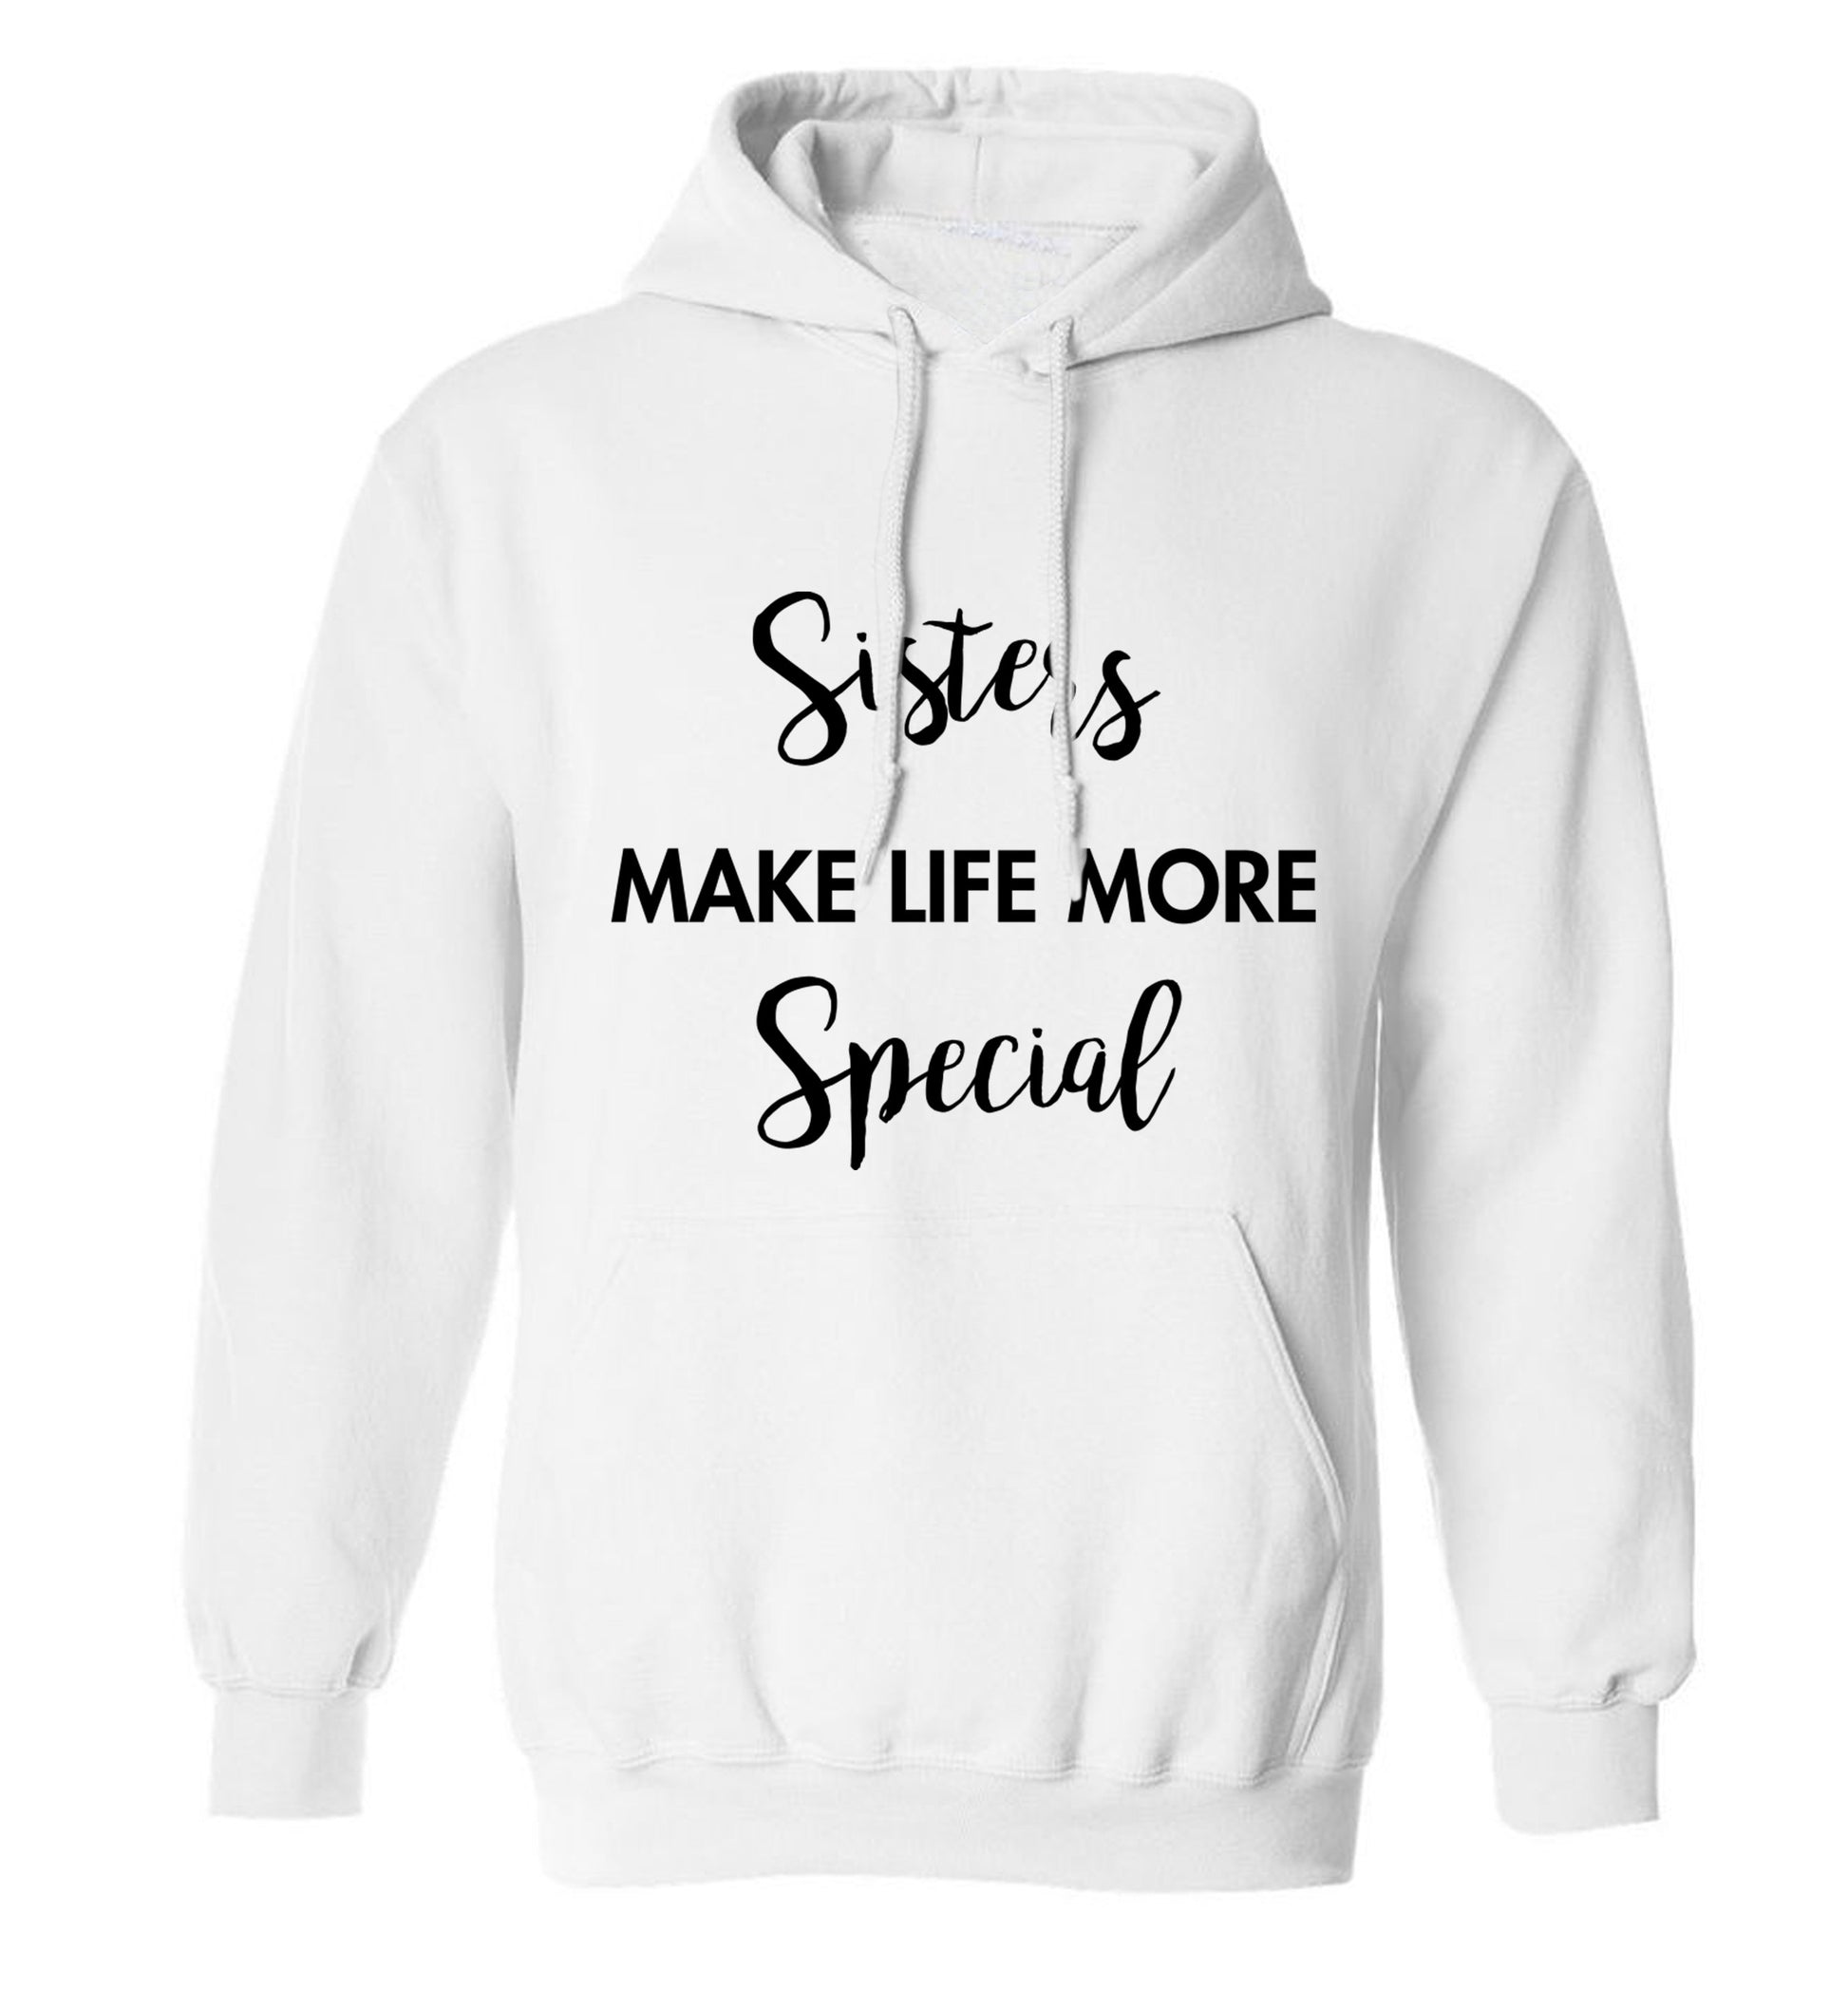 Sisters make life more special adults unisex white hoodie 2XL